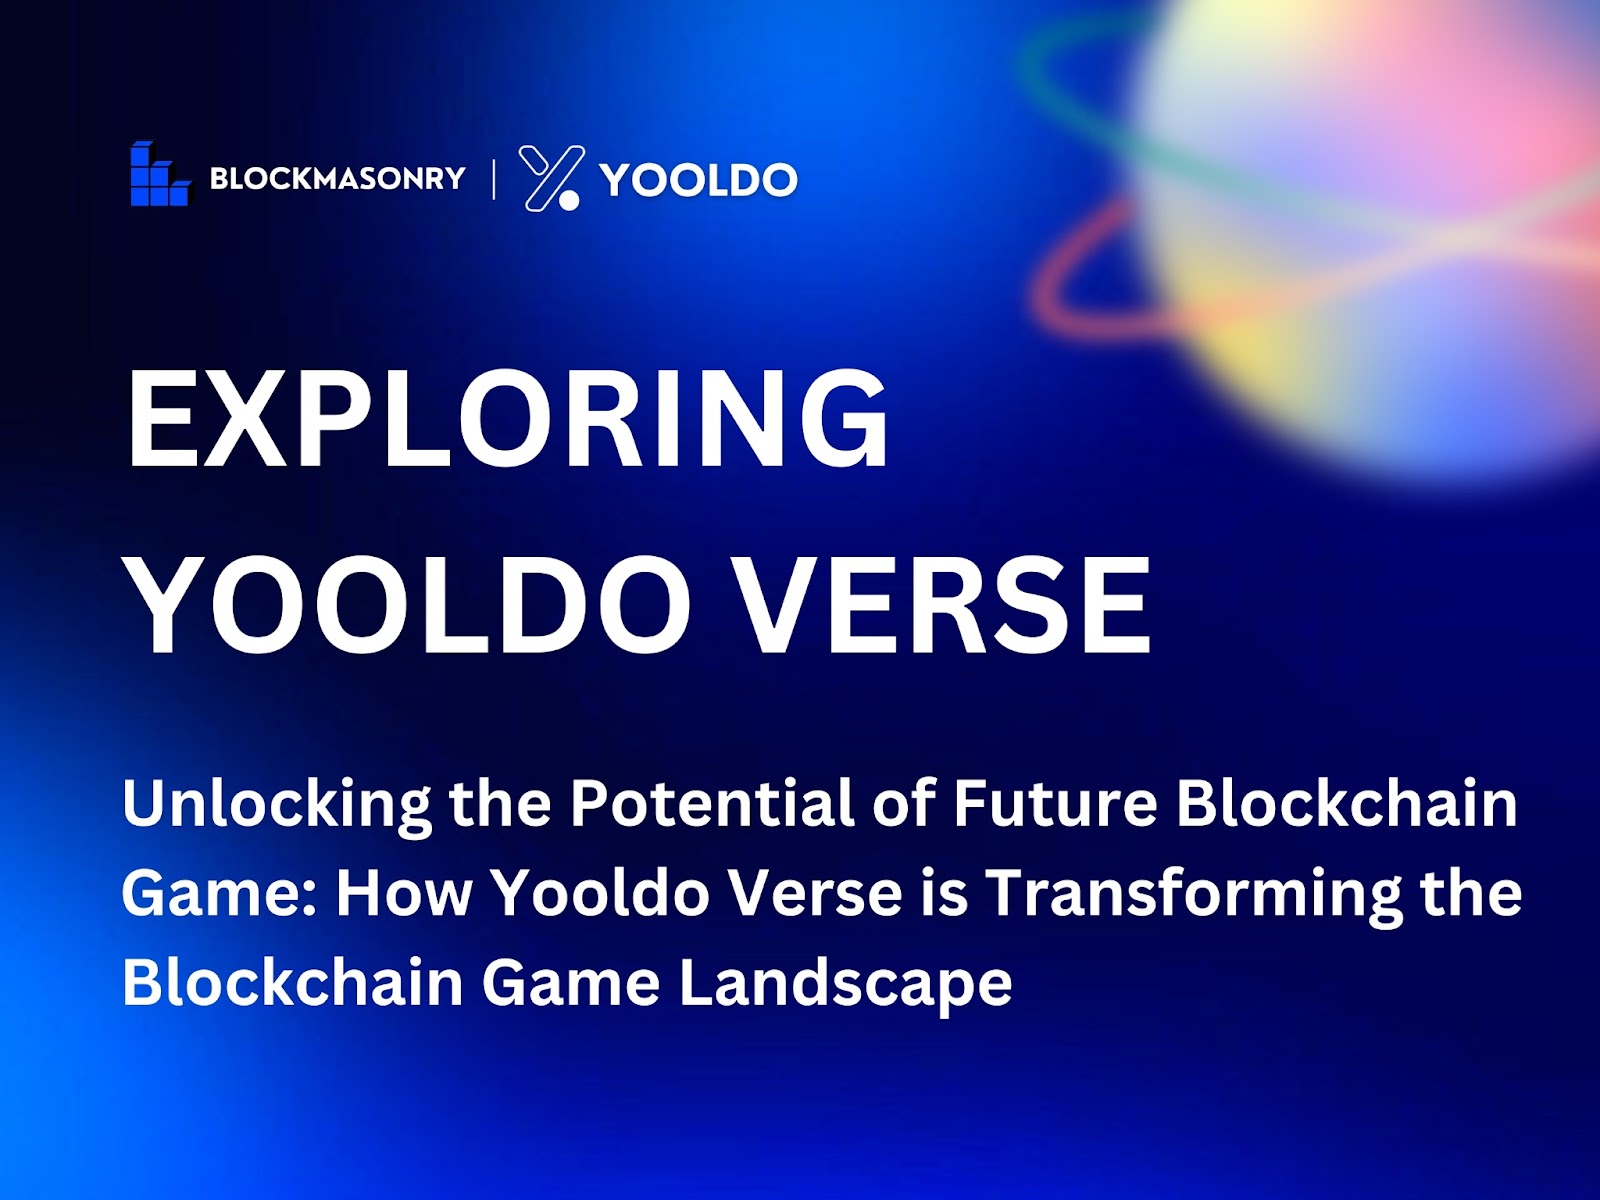 Unlocking the Potential of Future Blockchain Game: How Yooldo Verse is Transforming the Blockchain Game Landscape